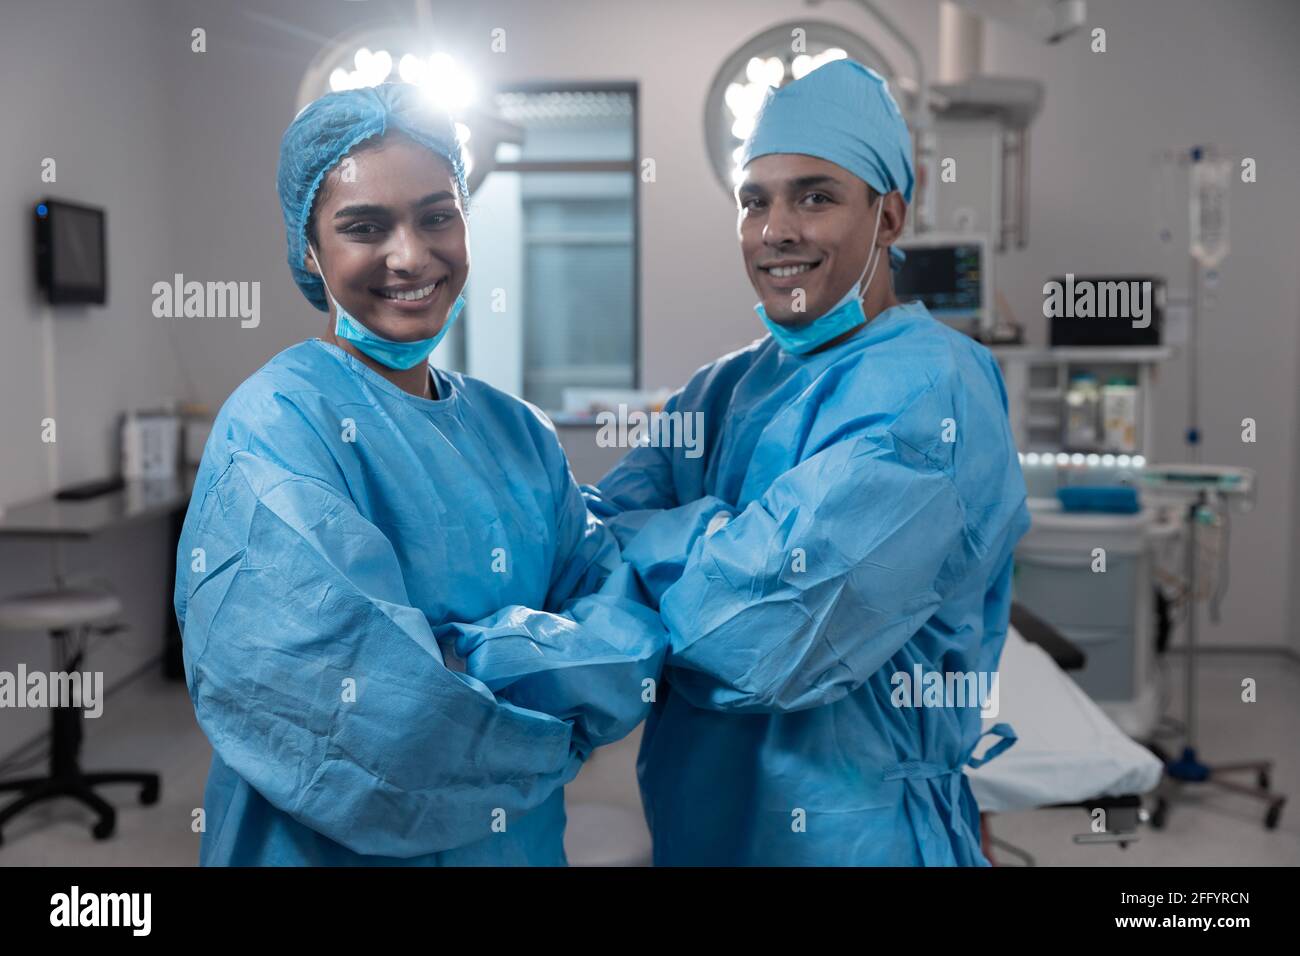 Smiling diverse male female surgeons with face masks and protective clothing in operating theatre Stock Photo